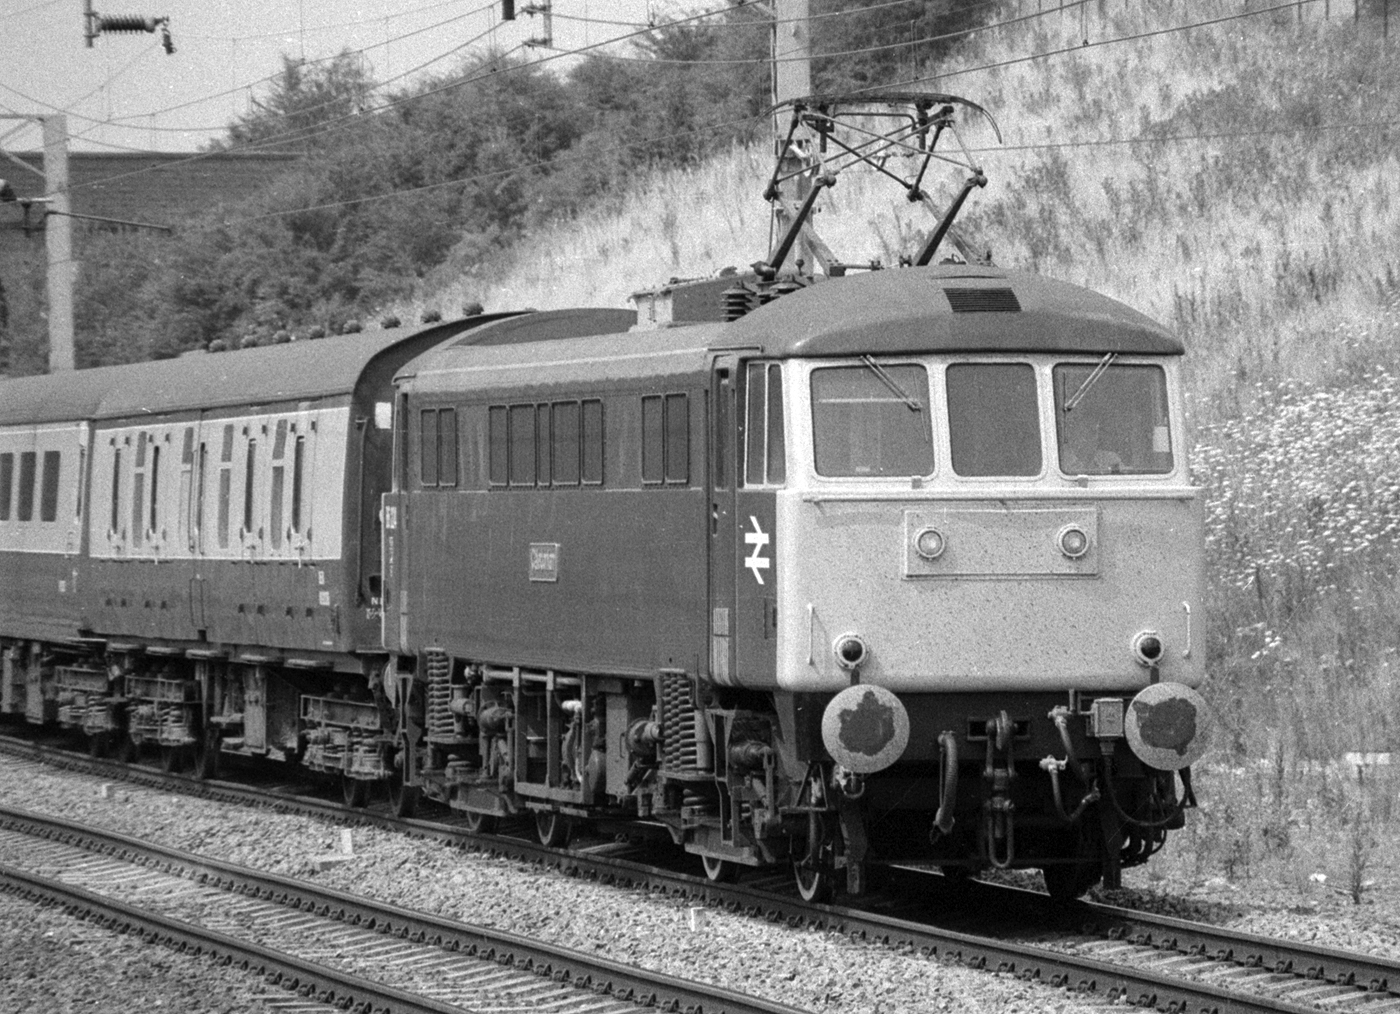 An "up" express (London-bound) is led by 86 224 "Caledonian".